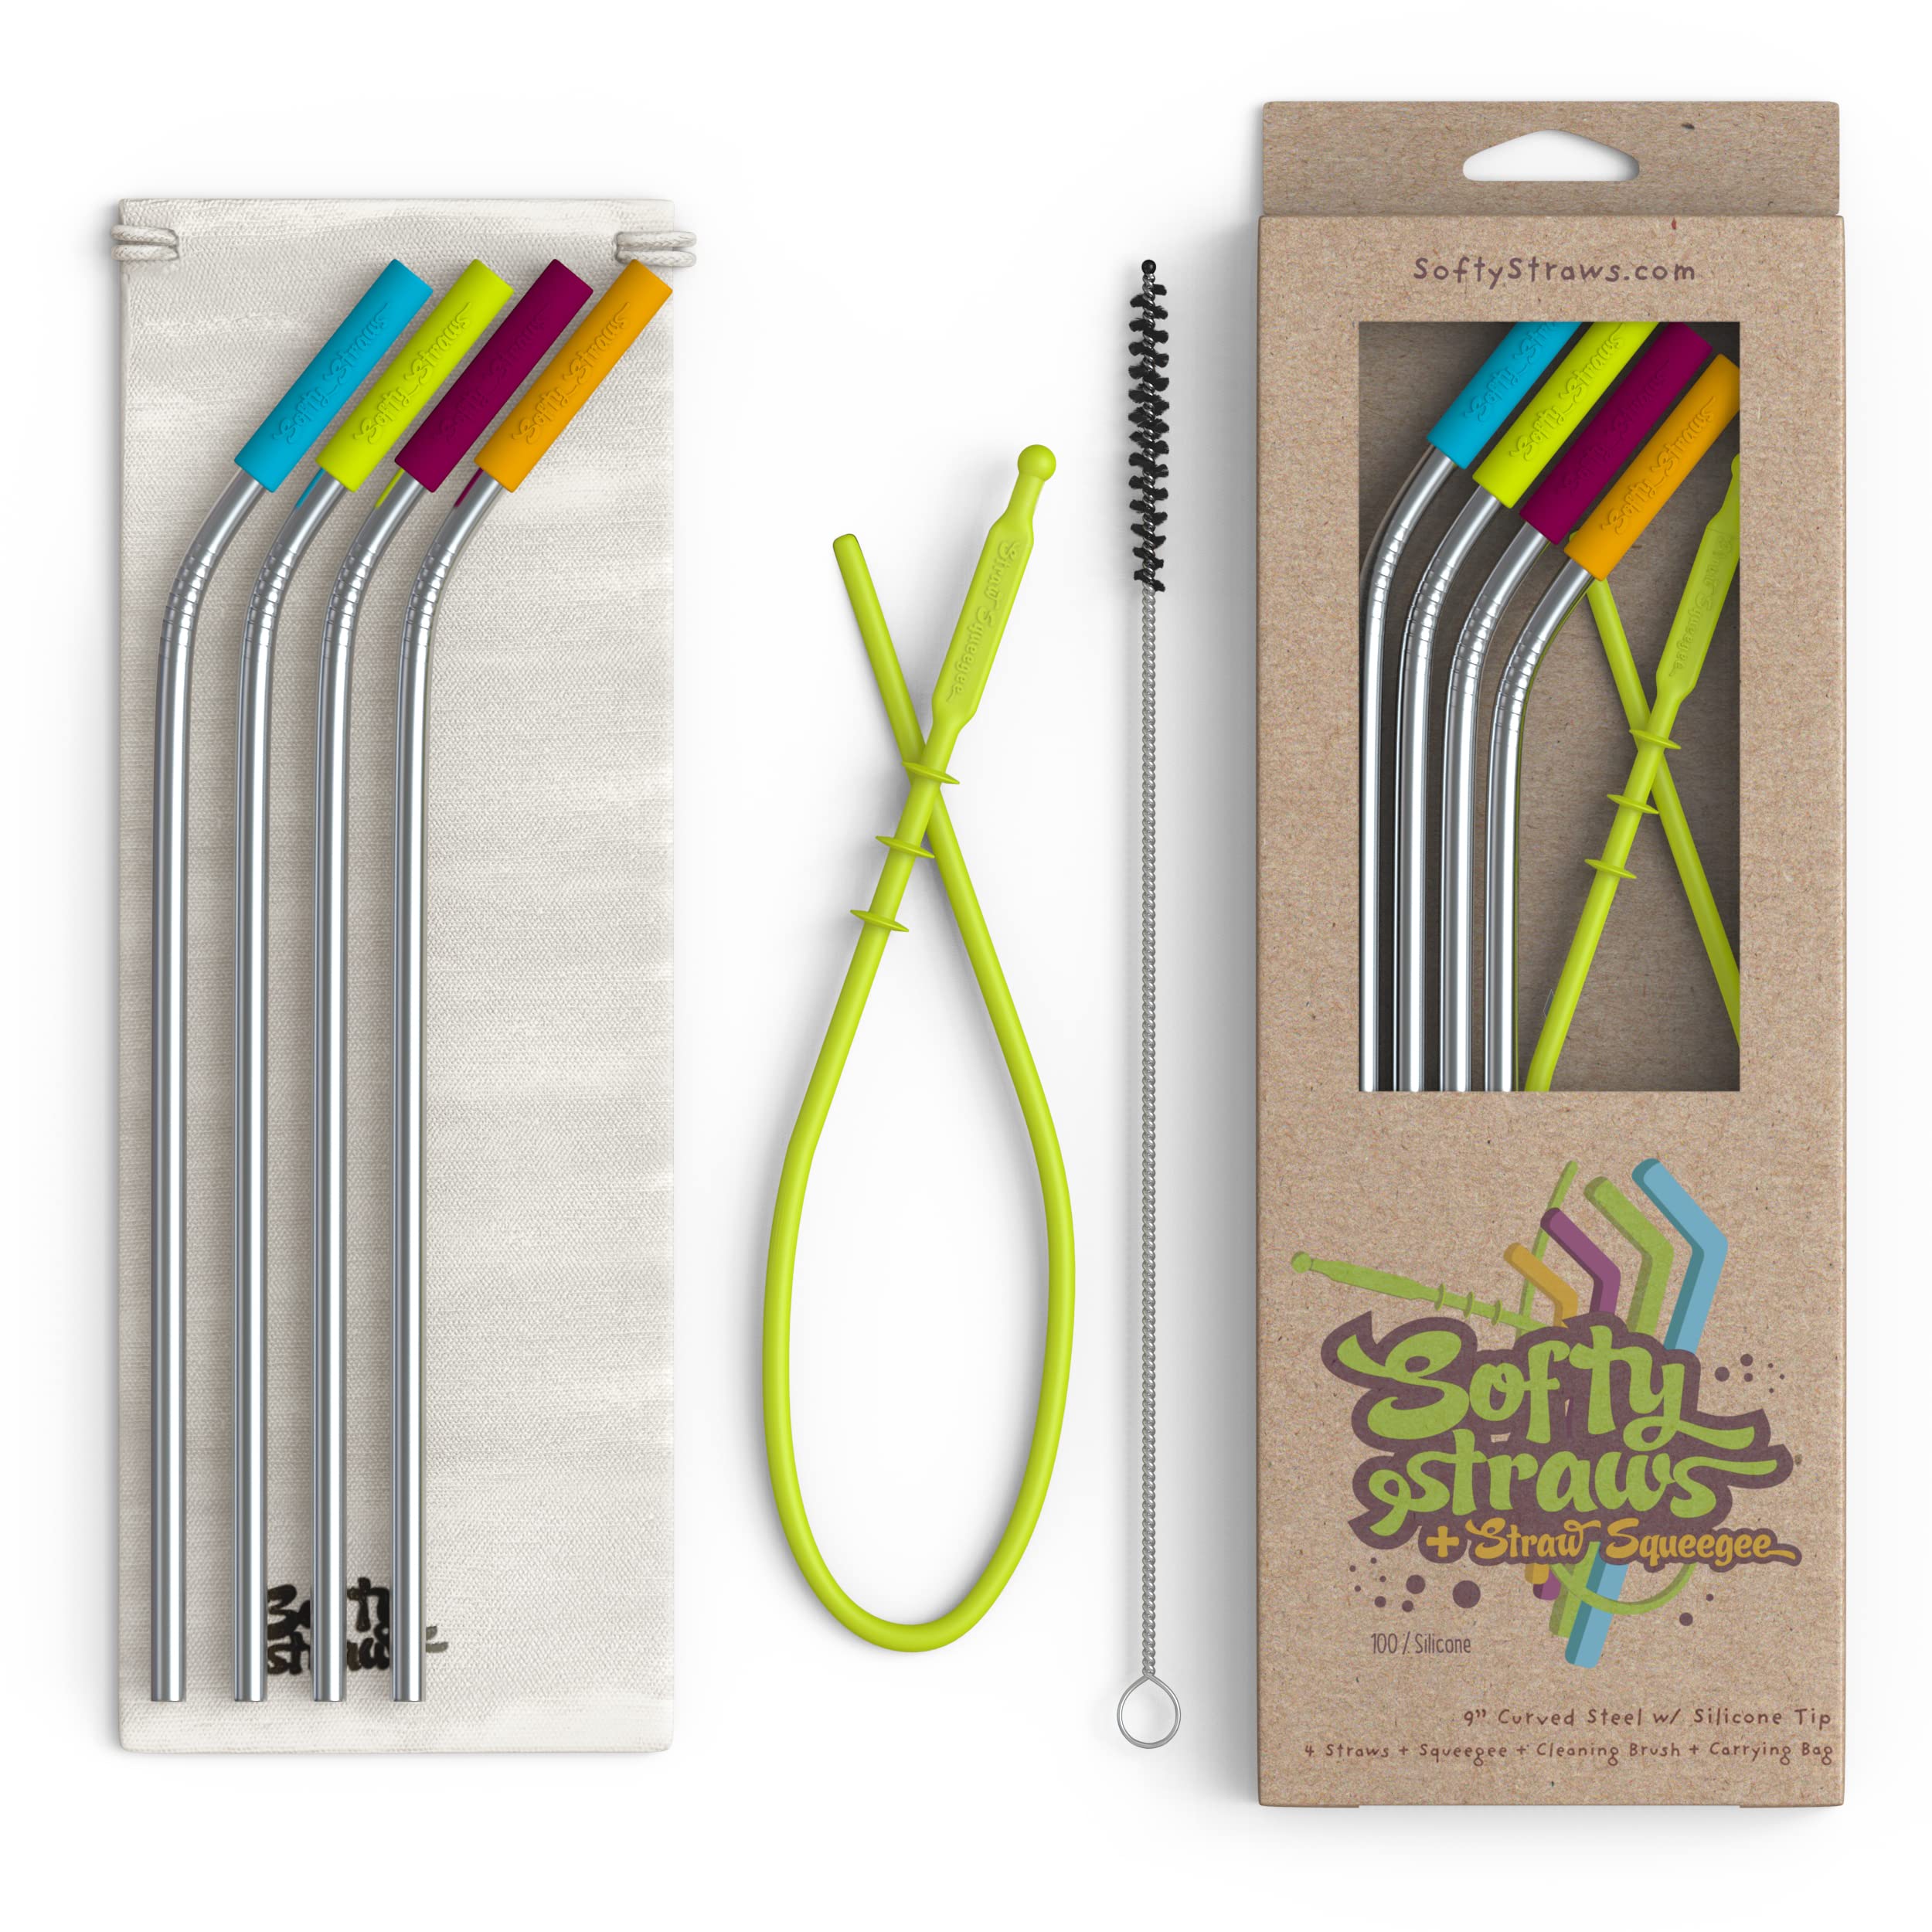 Softy Straws Premium Reusable Stainless Steel Drinking Straws With Silicone  Tips + Patented Straw Cleaners and Carrying Case - 9 Long Metal With Curved  Bend for 20/30/32oz Tumblers Assorted - Stainless Steel